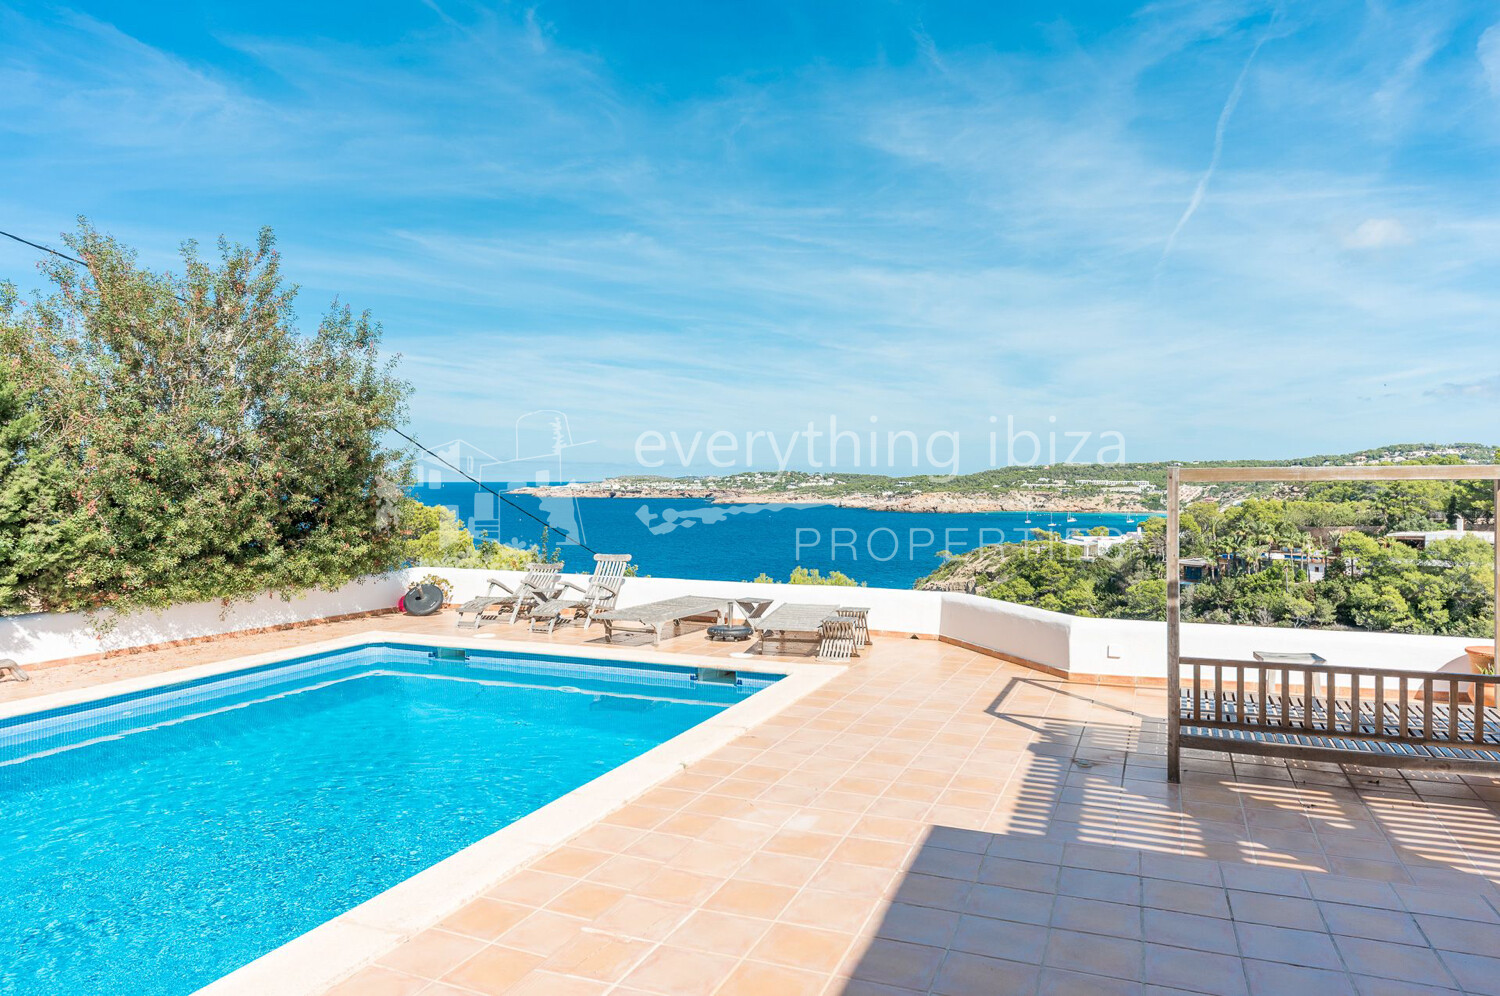 Charming Elegant Villa with Super Sea & Coastline Views in Peaceful Cala Moli, ref. 1704, for sale in Ibiza by everything ibiza Properties